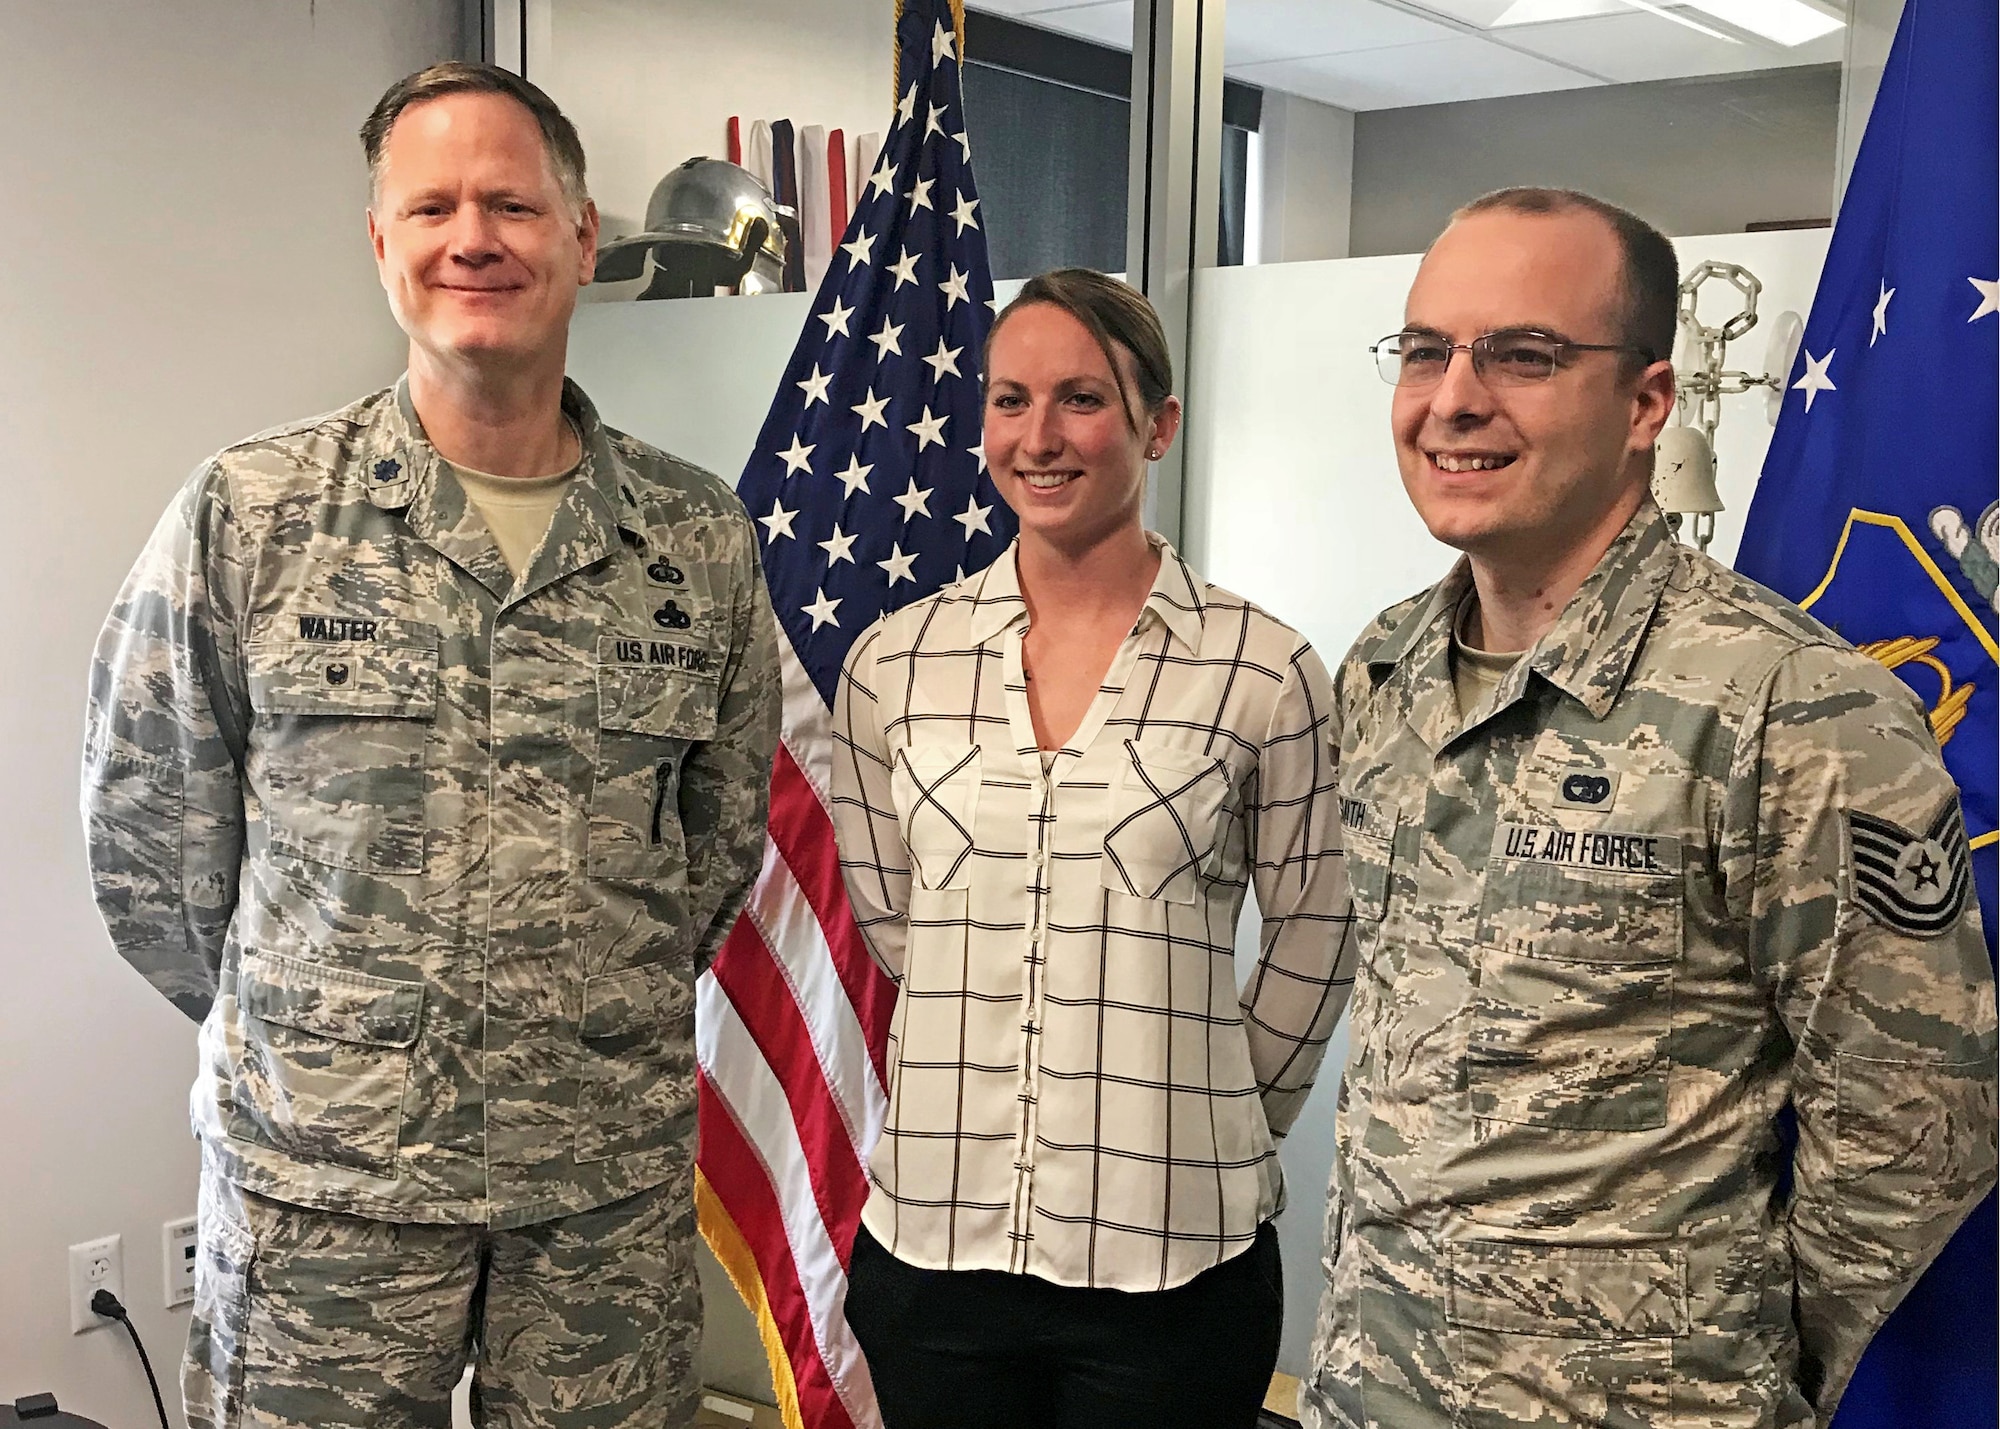 Lt. Col. Joseph Walter, wing process manager for the 442d Fighter Wing, soon-to-be 2nd Lt. Margaret "Maggie" Ann Atkins and Tech. Sgt. Michael Smith, Officer Accessions recruiter at Scott AFB, pose for a photo after Atkins takes the oath of enlistment at Whiteman Air Force Base, May 21, 2018.